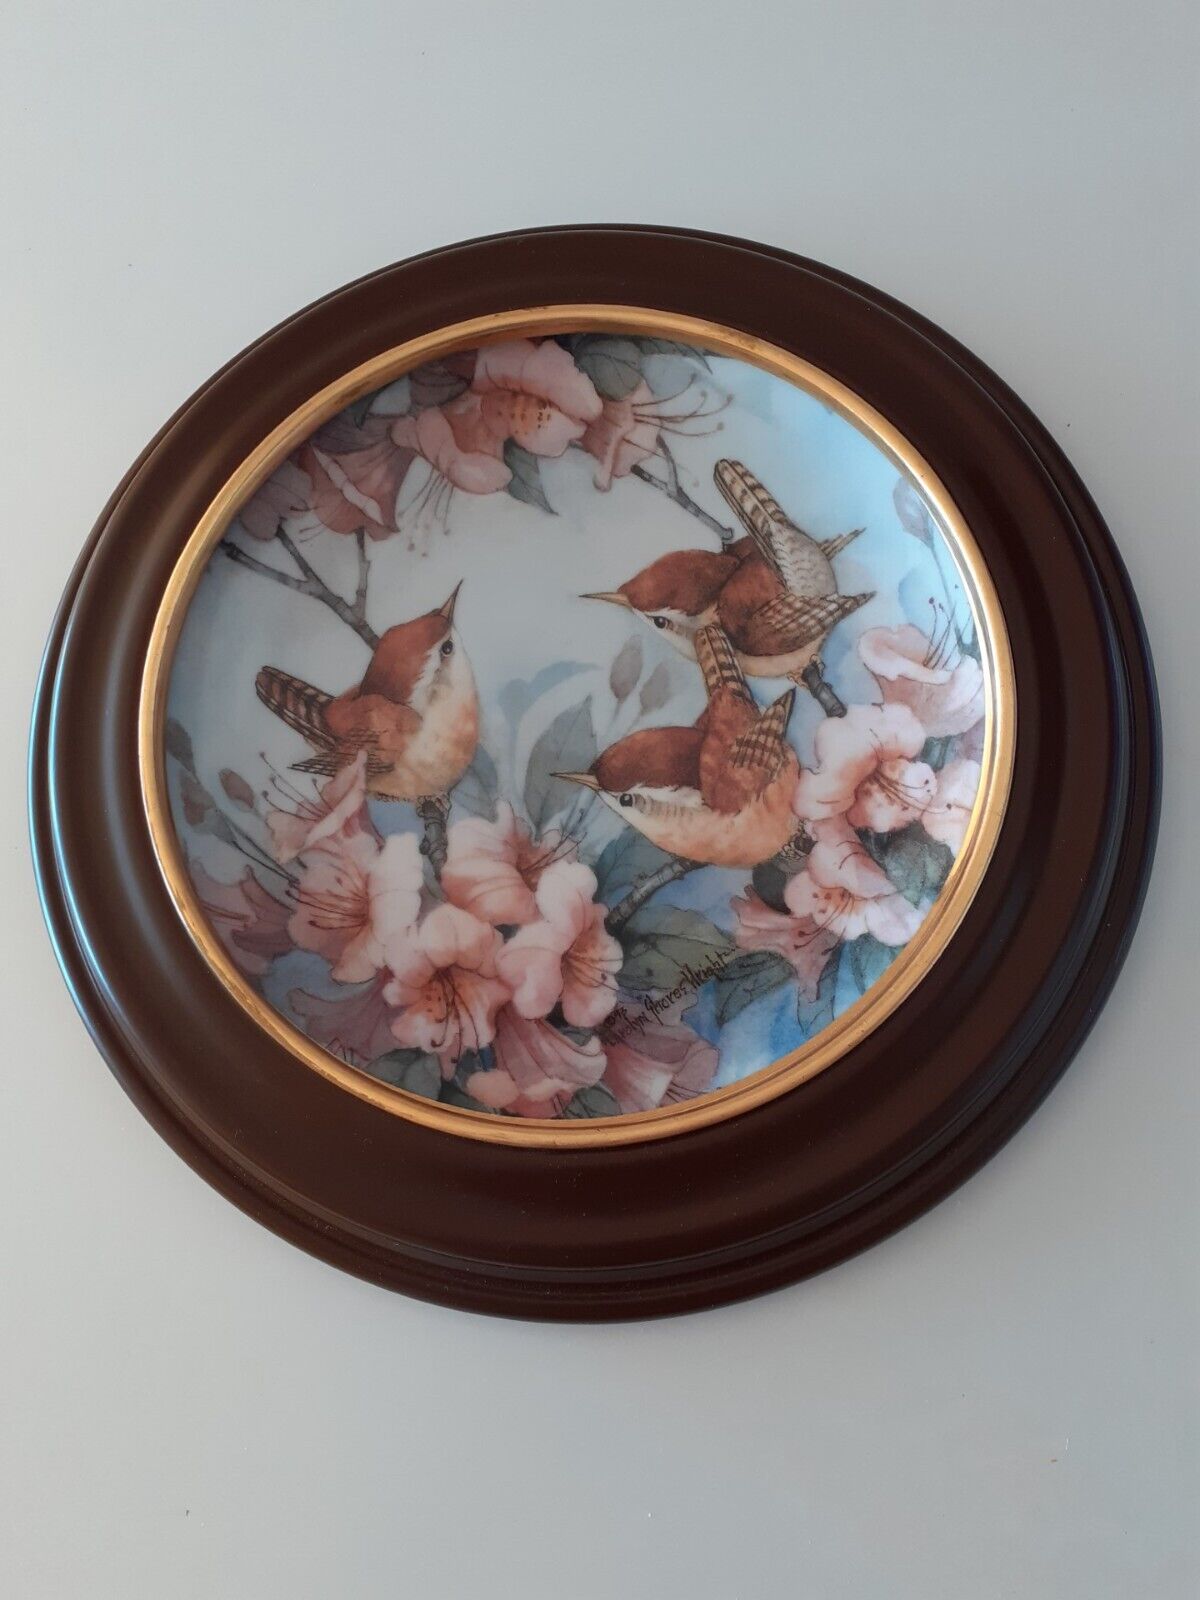 Three Part Harmony - Franklin Mint Limited Edition Plate - Carolyn Shores Wright